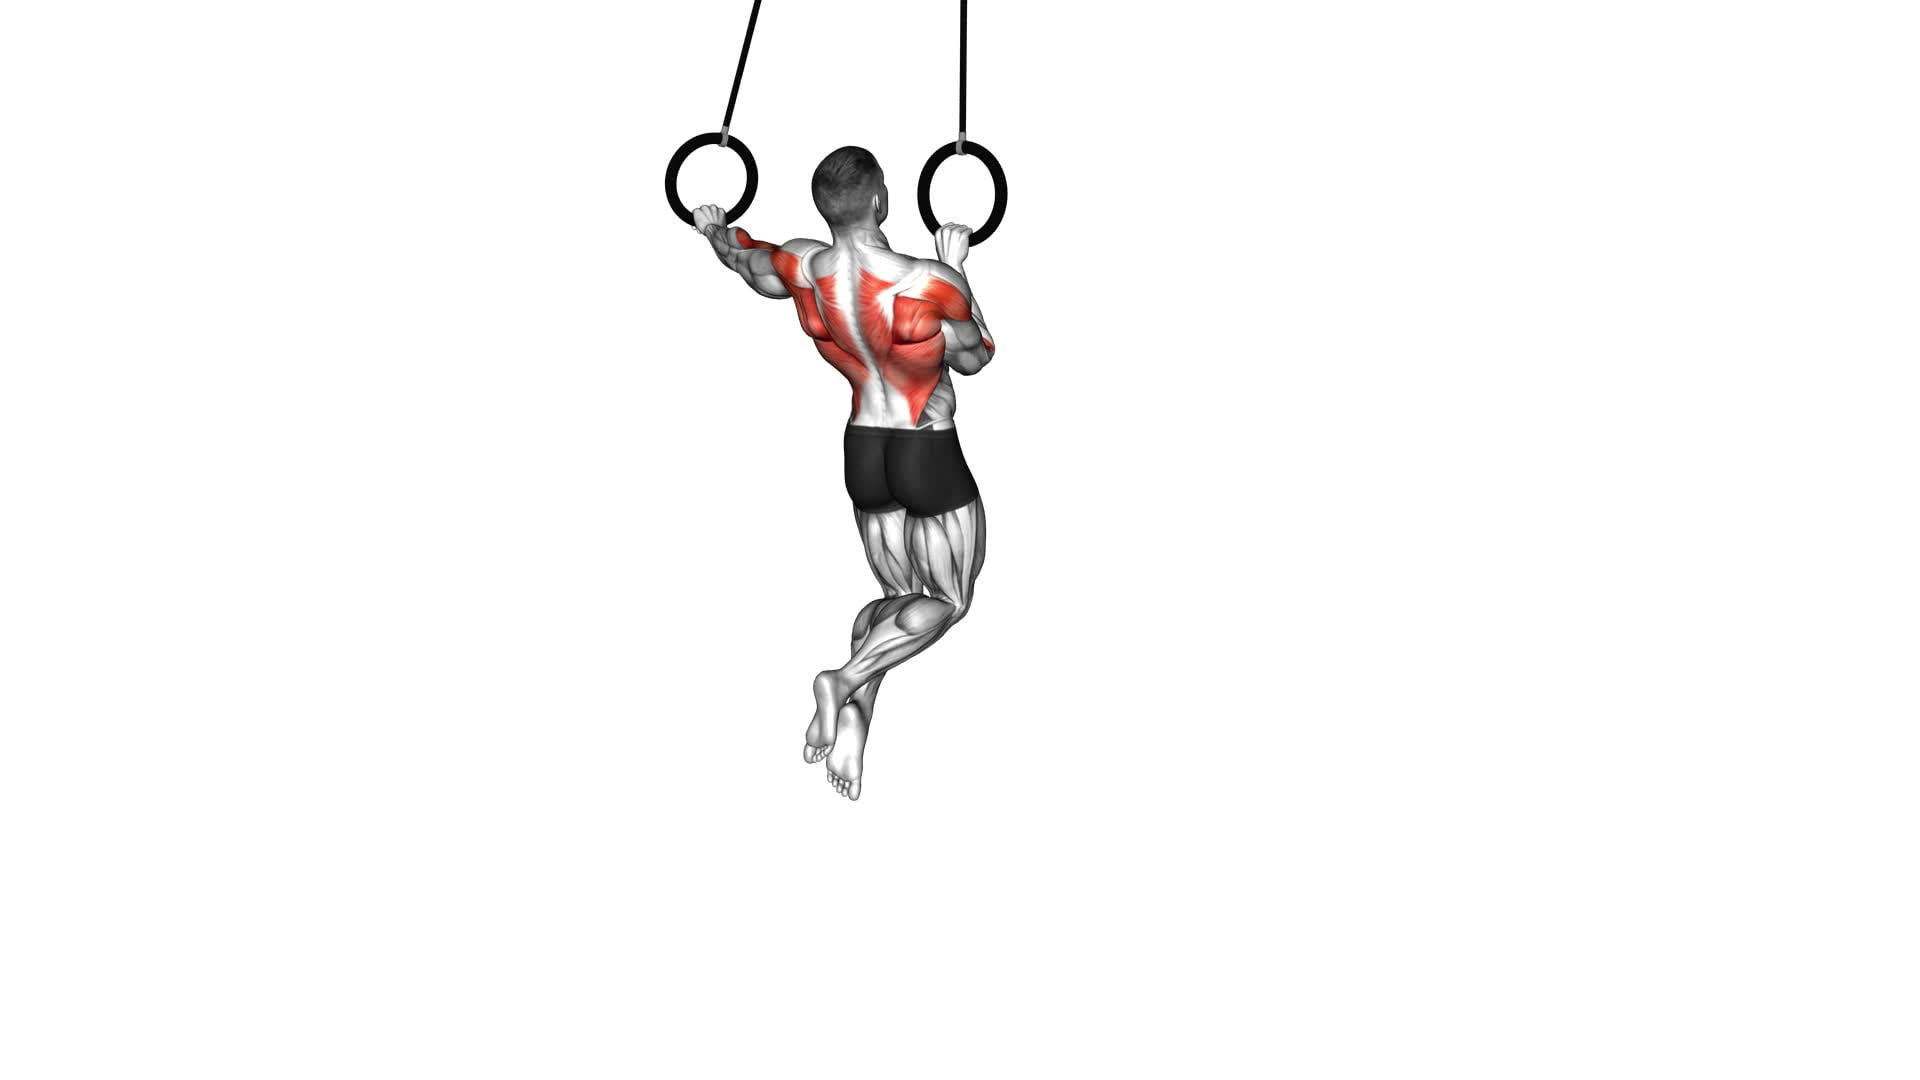 Ring Archer Pull-up (male) - Video Exercise Guide & Tips